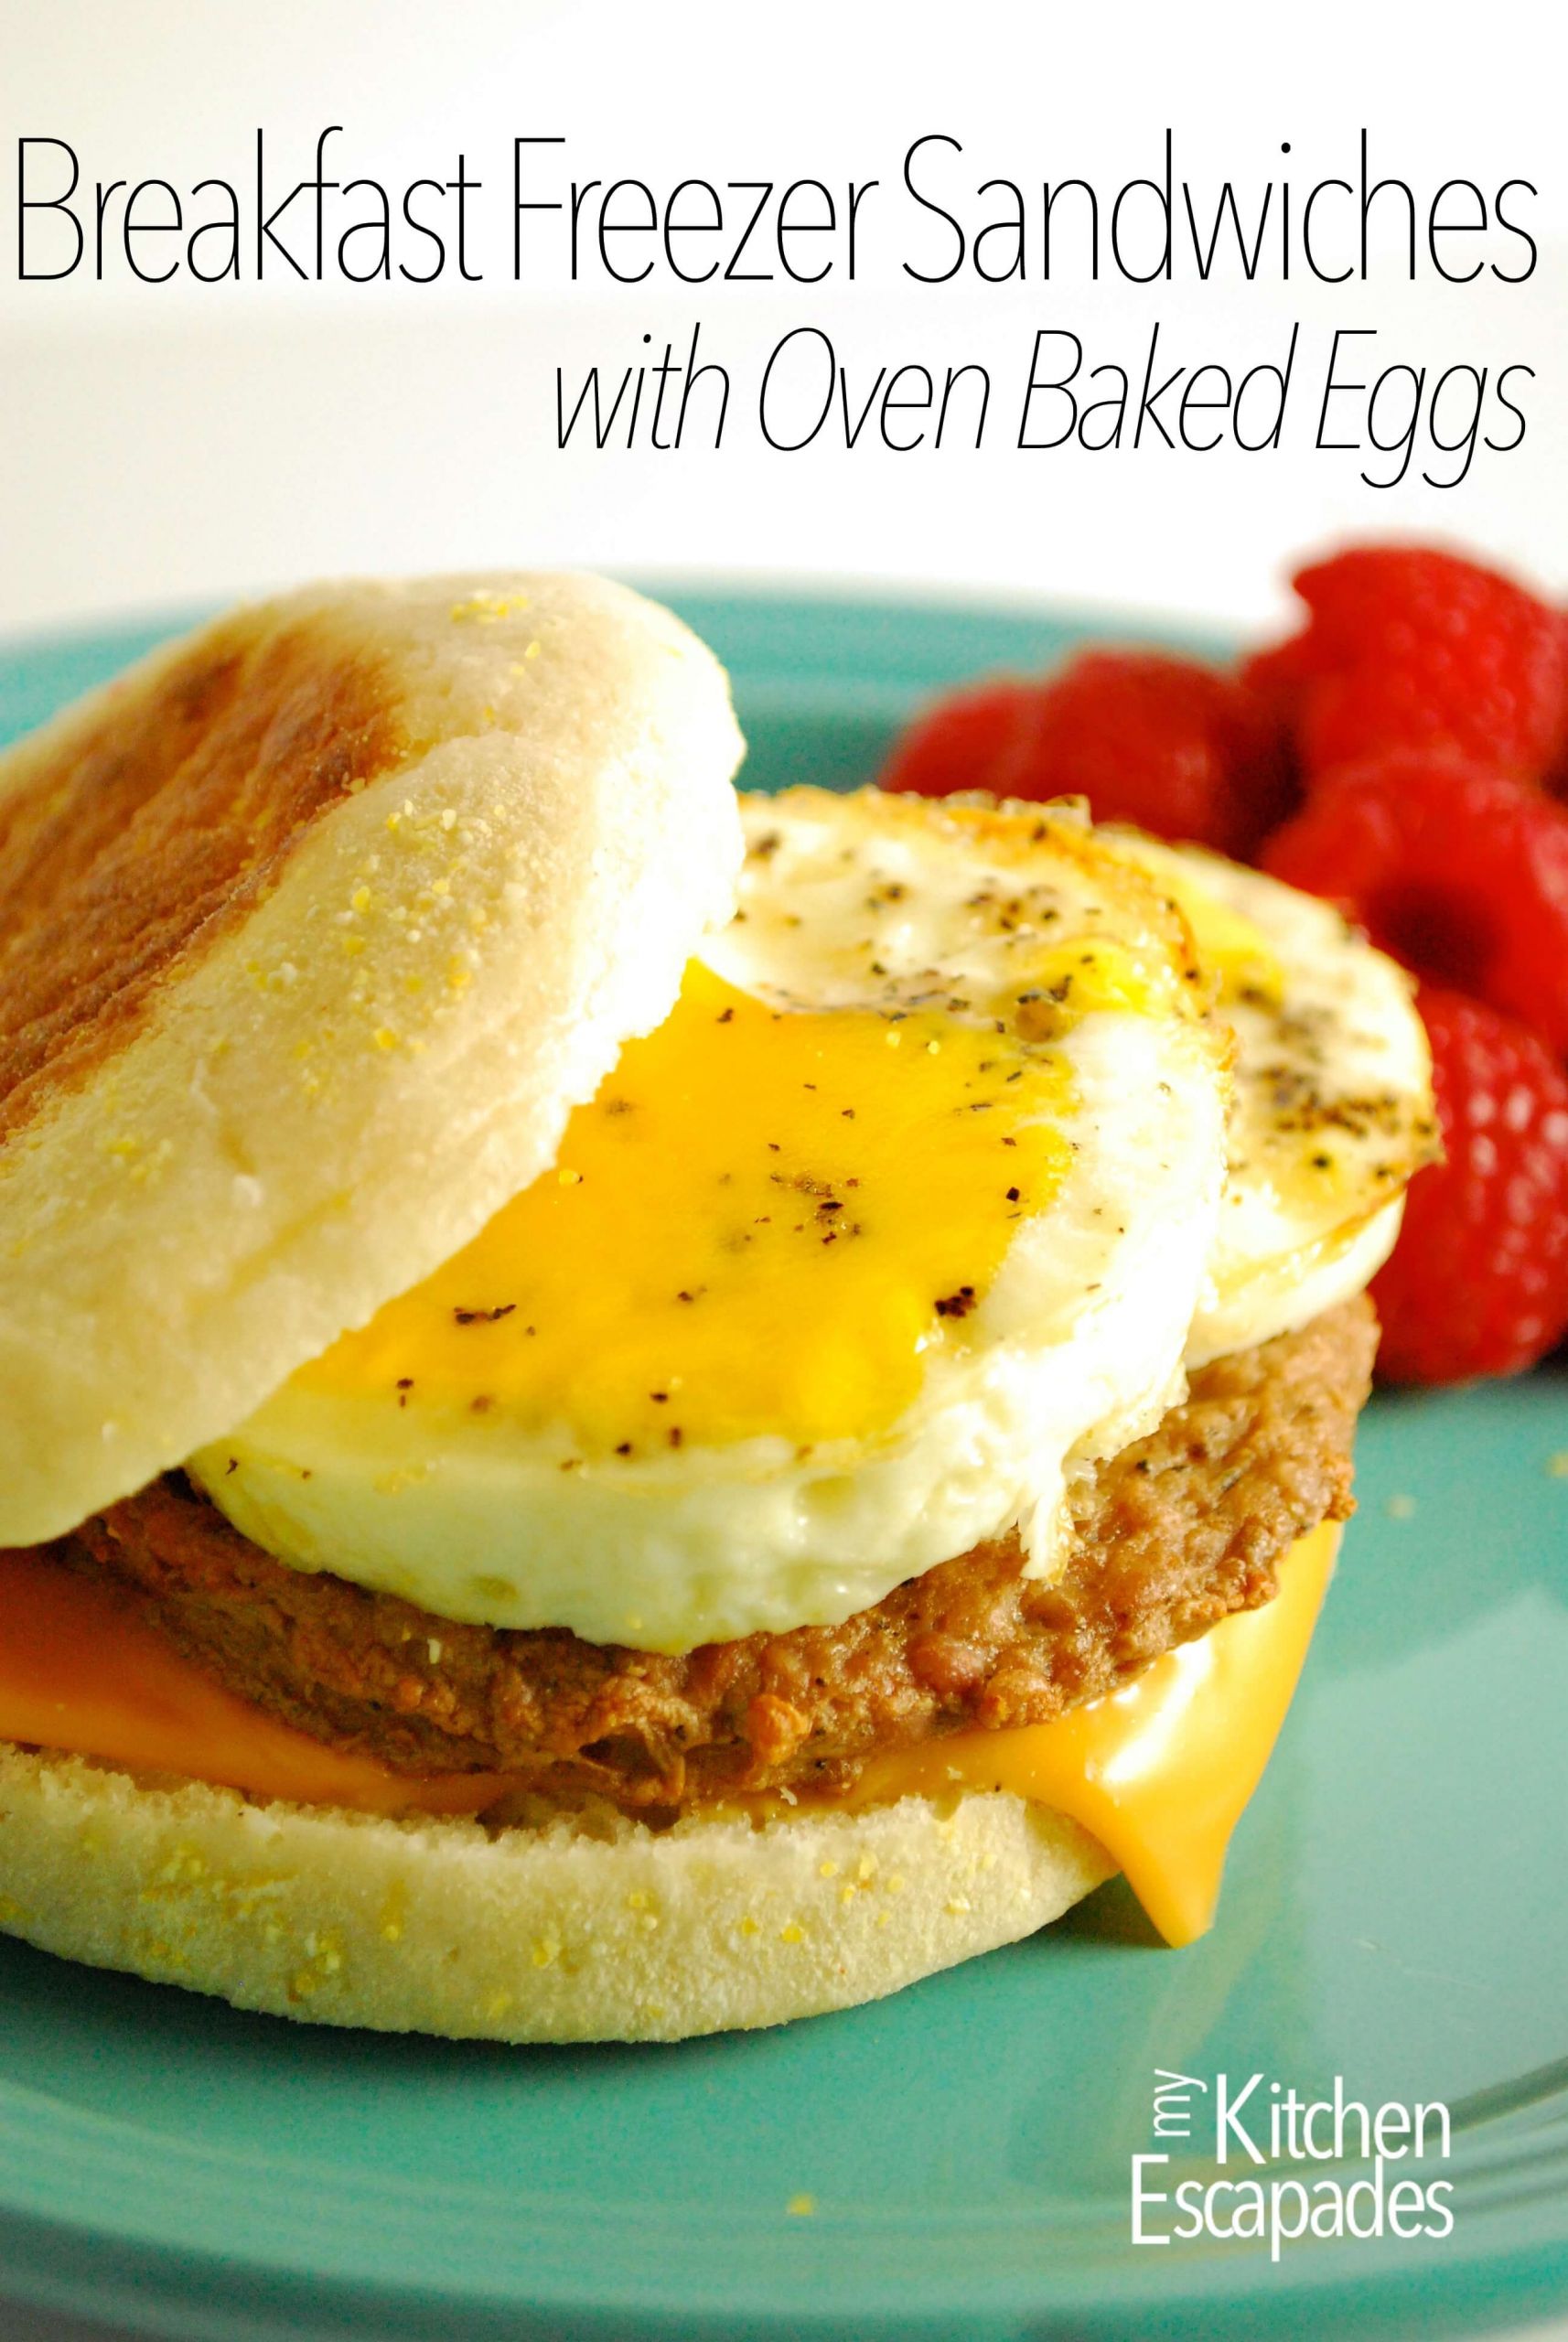 Cooking Eggs In the Oven for Breakfast Sandwiches Elegant Freezer Breakfast Sandwich with Oven Baked Eggs